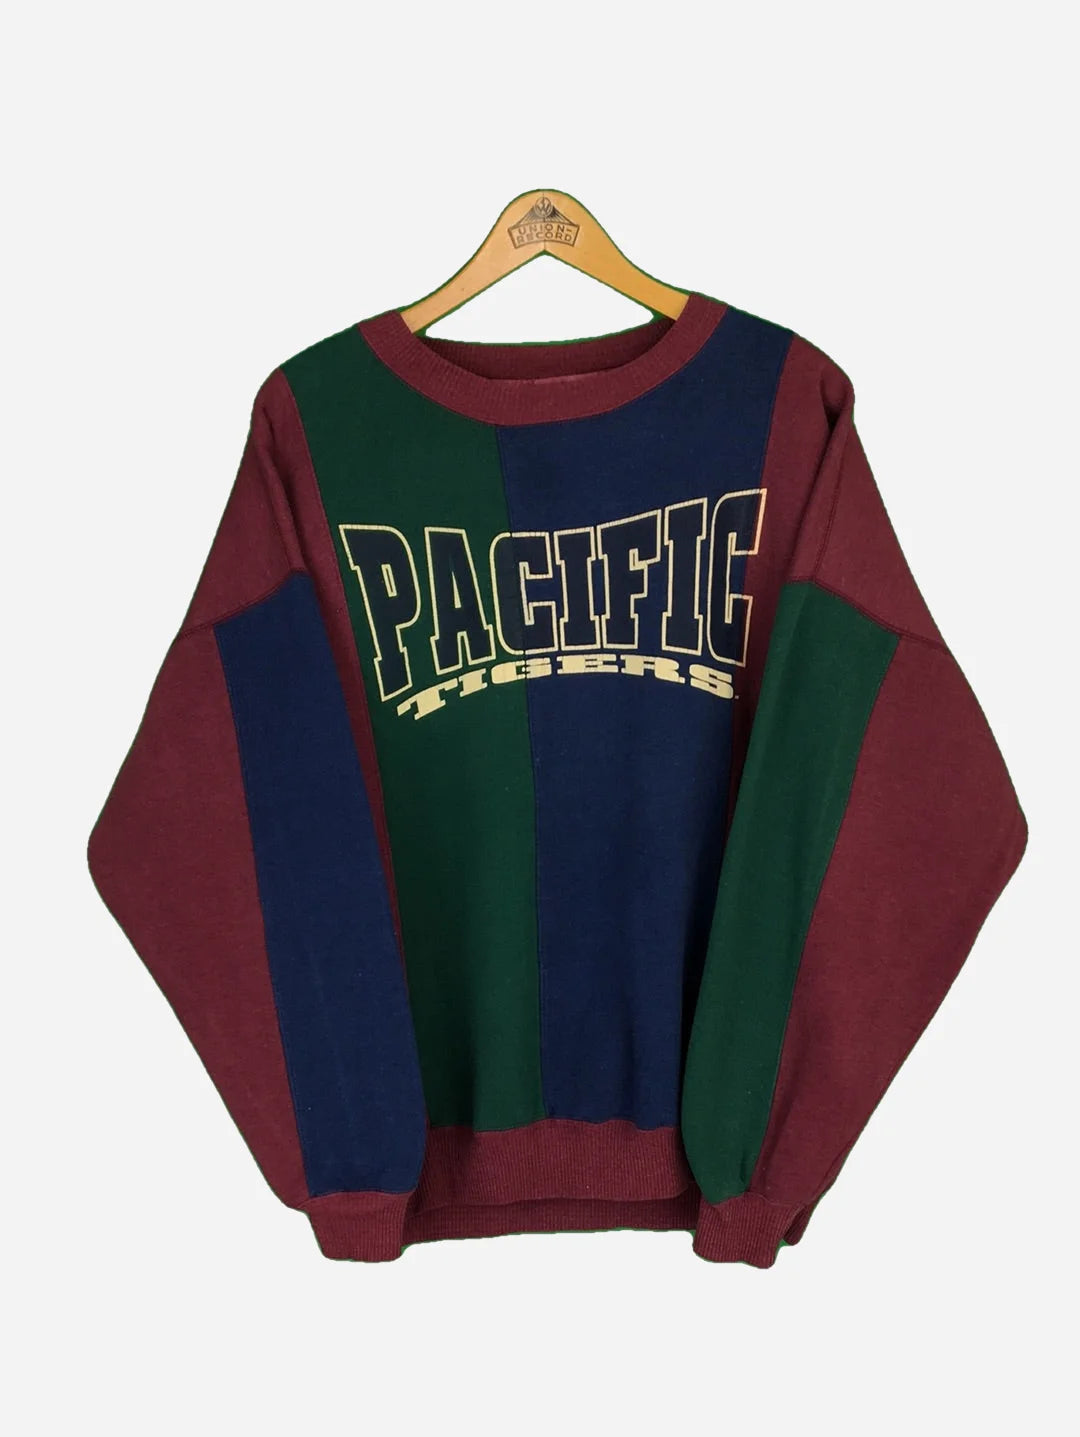 Pacific Sweater (XL)